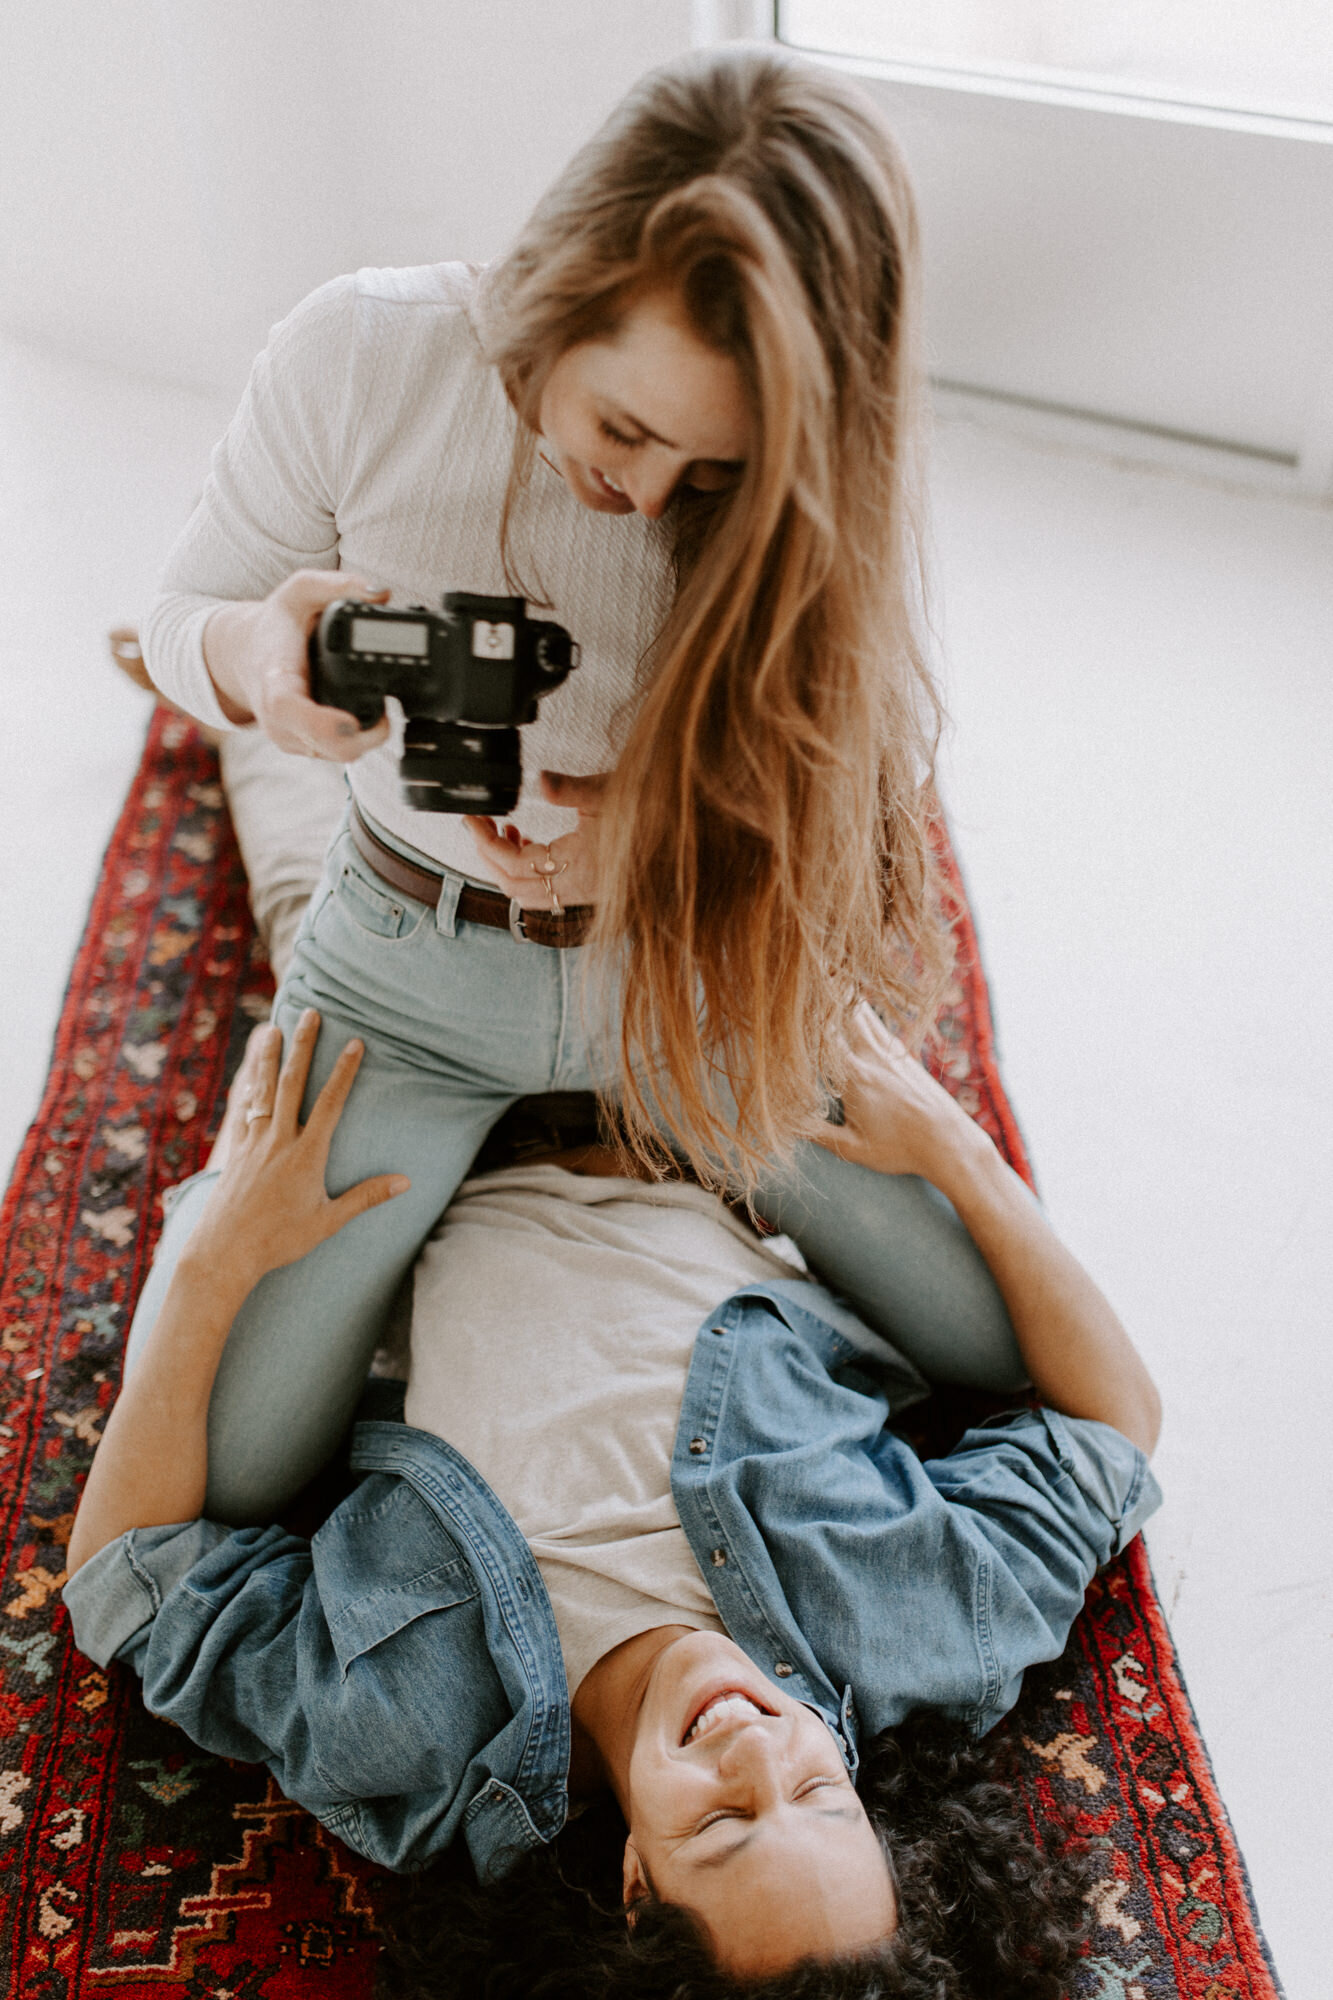 During an in home photography session with wedding photographer Diana Coulter, a Denver, Colorado couple takes photos of each other before social distancing and quarantine